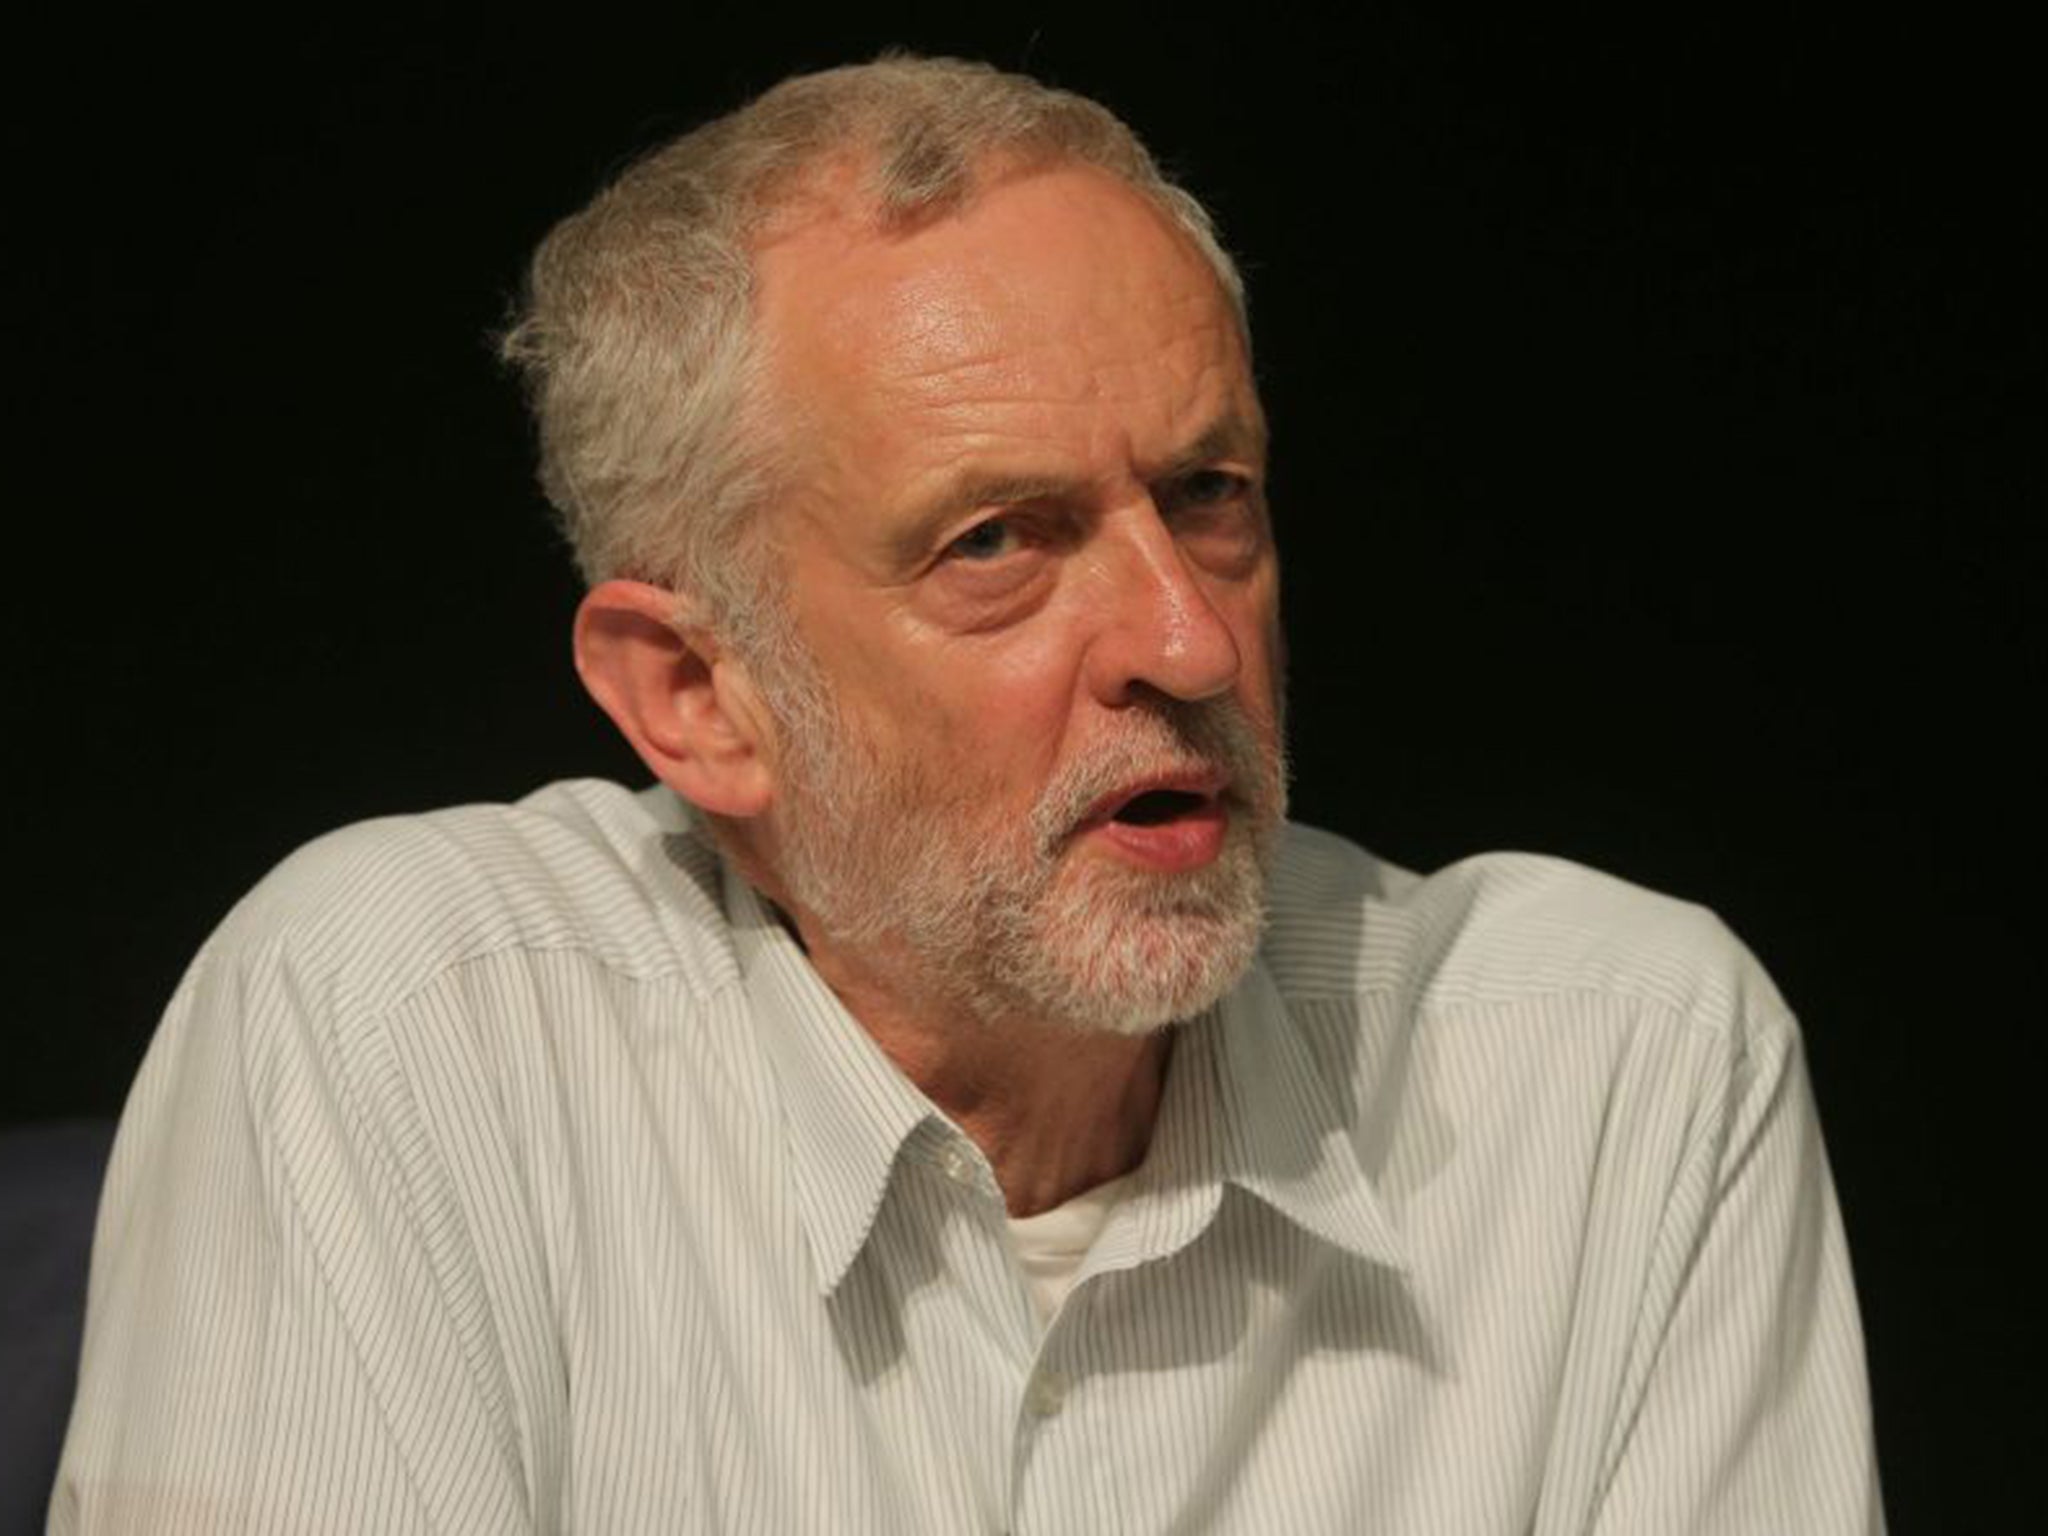 Labour MPs are being urged today to rally behind Jeremy Corbyn, the left-wing challenger for the party leadership – not to get him elected but to make sure he at least gets the chance to take part in the full-blown election